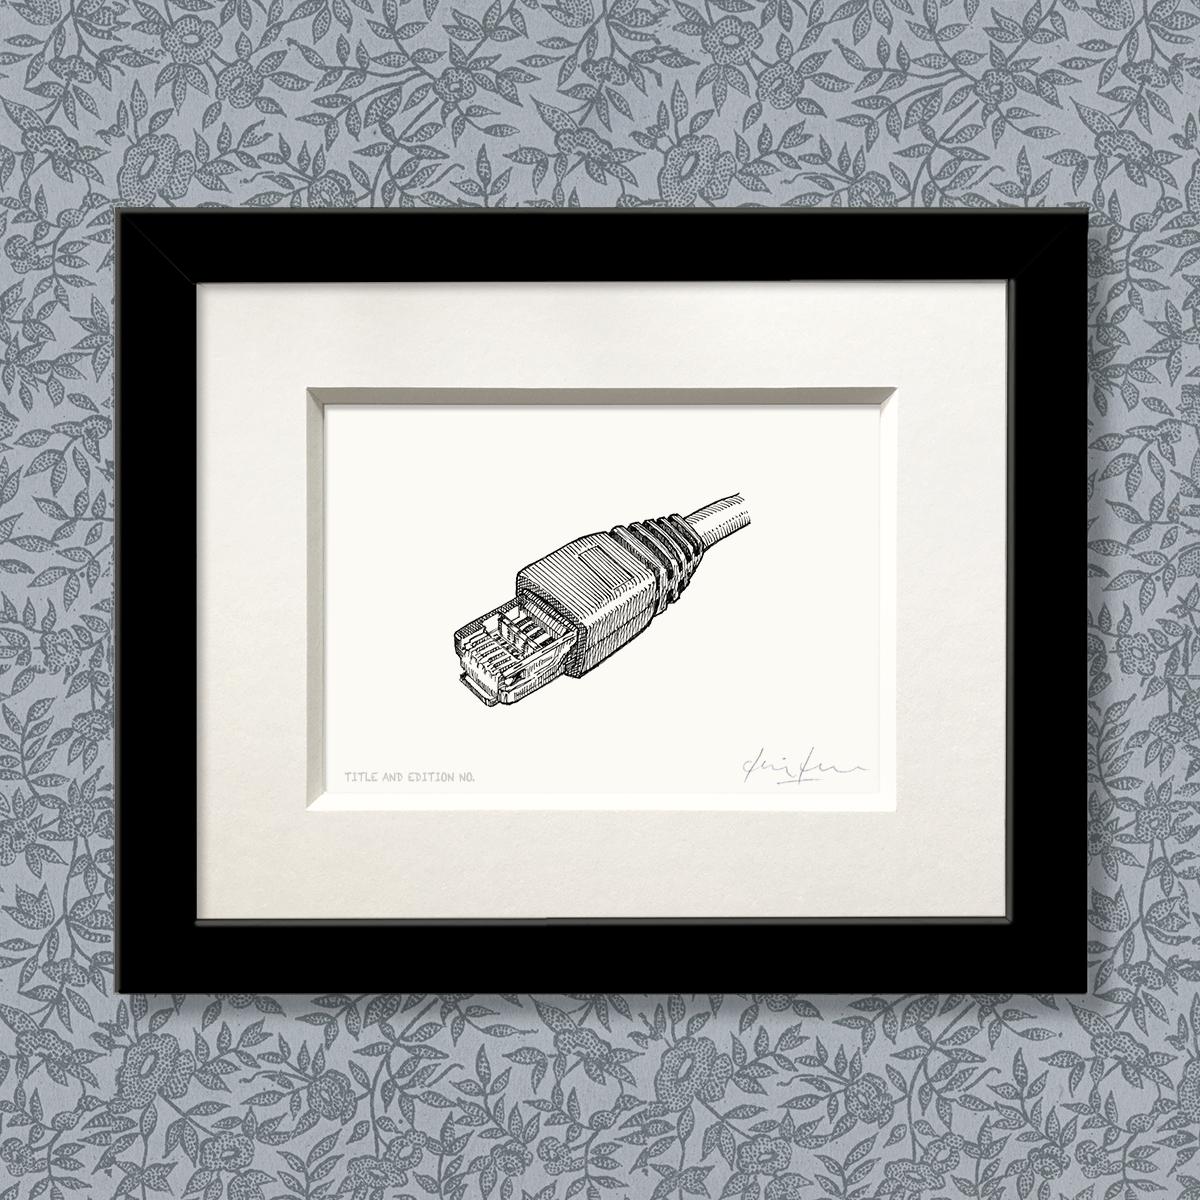 Limited edition print from pen and ink drawing of an ethernet connector in a black frame